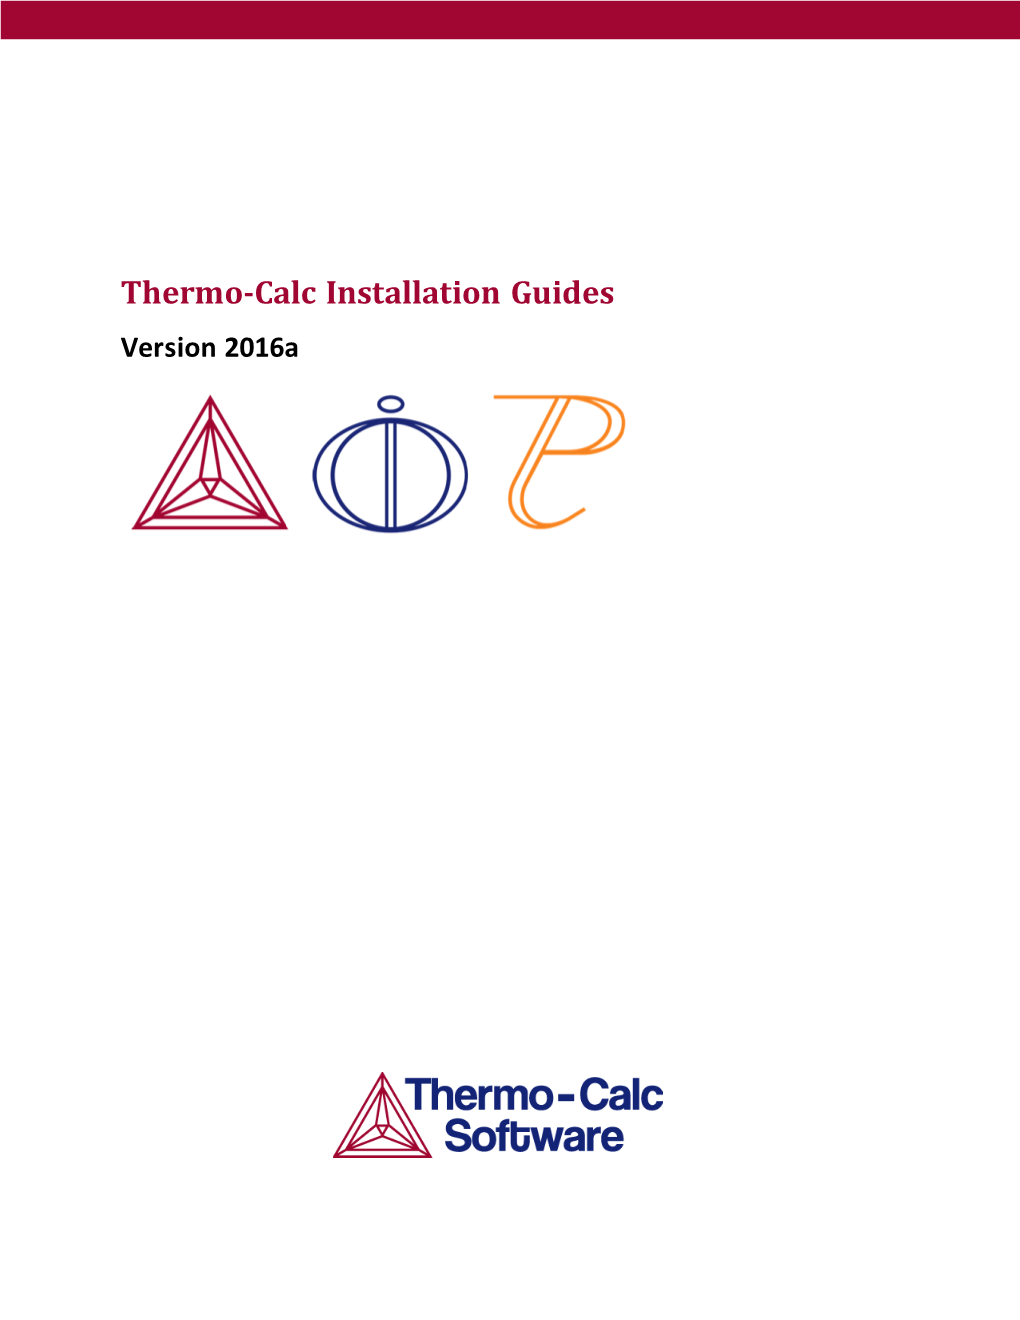 Thermo-Calc Installation Guides Version 2016A Copyright 2016 Thermo-Calc Software AB